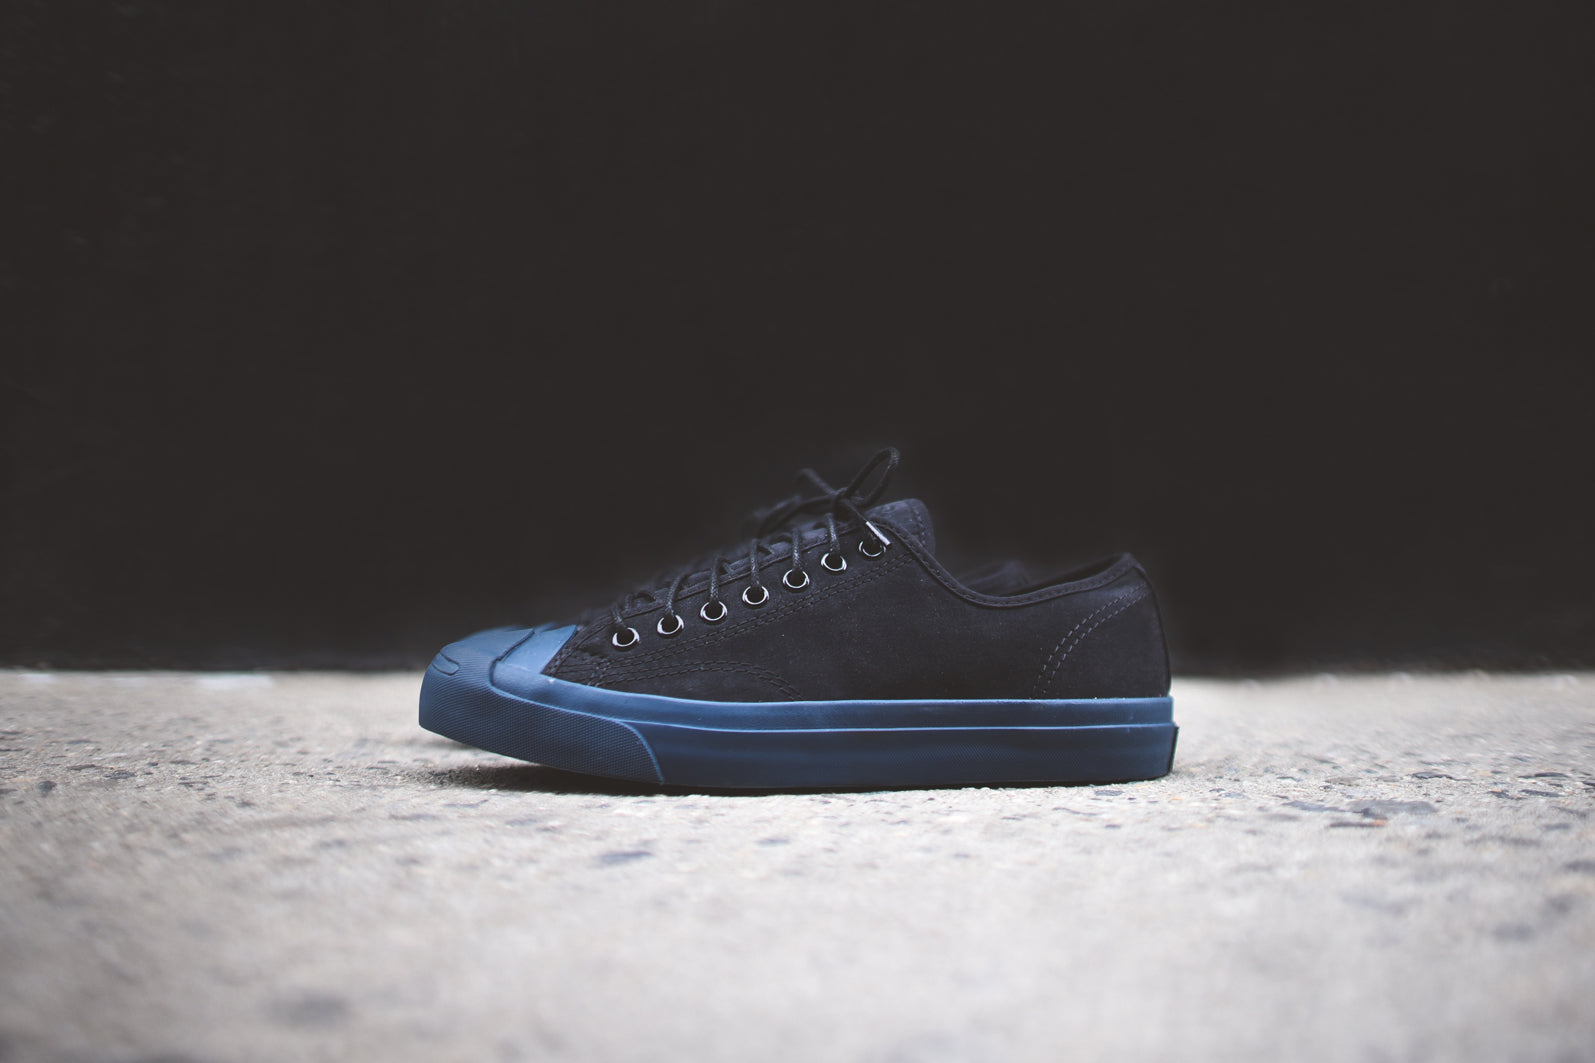 jack purcell ox black